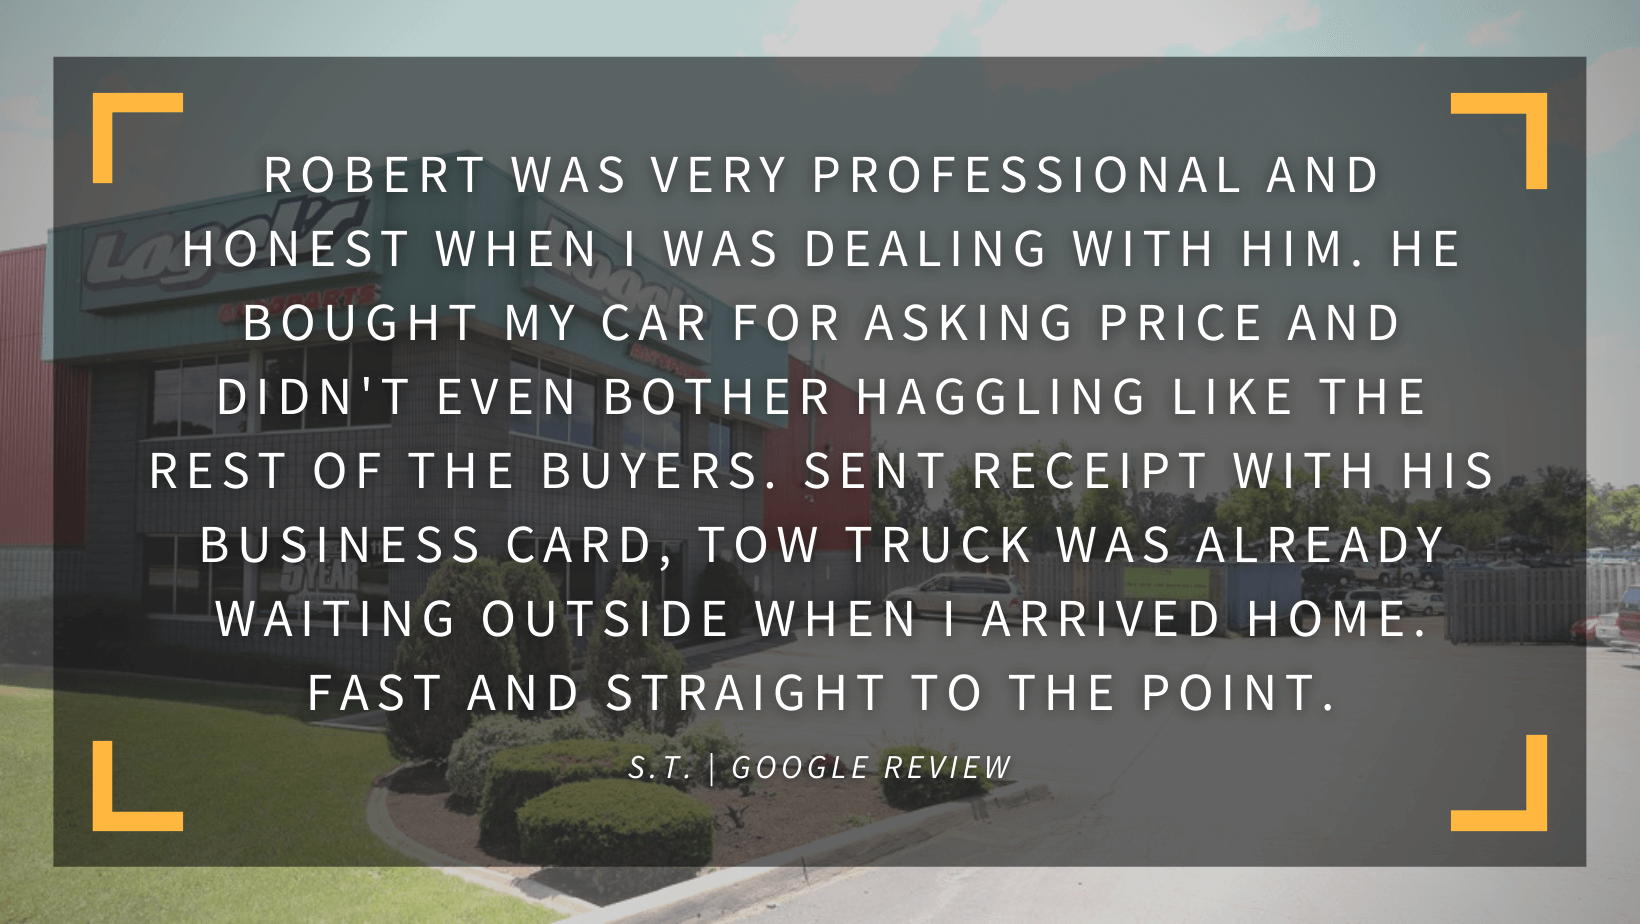 Robert was very professional and honest when I was dealing with him. He bought my car for asking price and didn't even bother haggling like the rest of the buyers. Send receipt with his business card, tow truck was already waiting outside when I arrived home. Fast and straight to the point. S.T. Google Review.